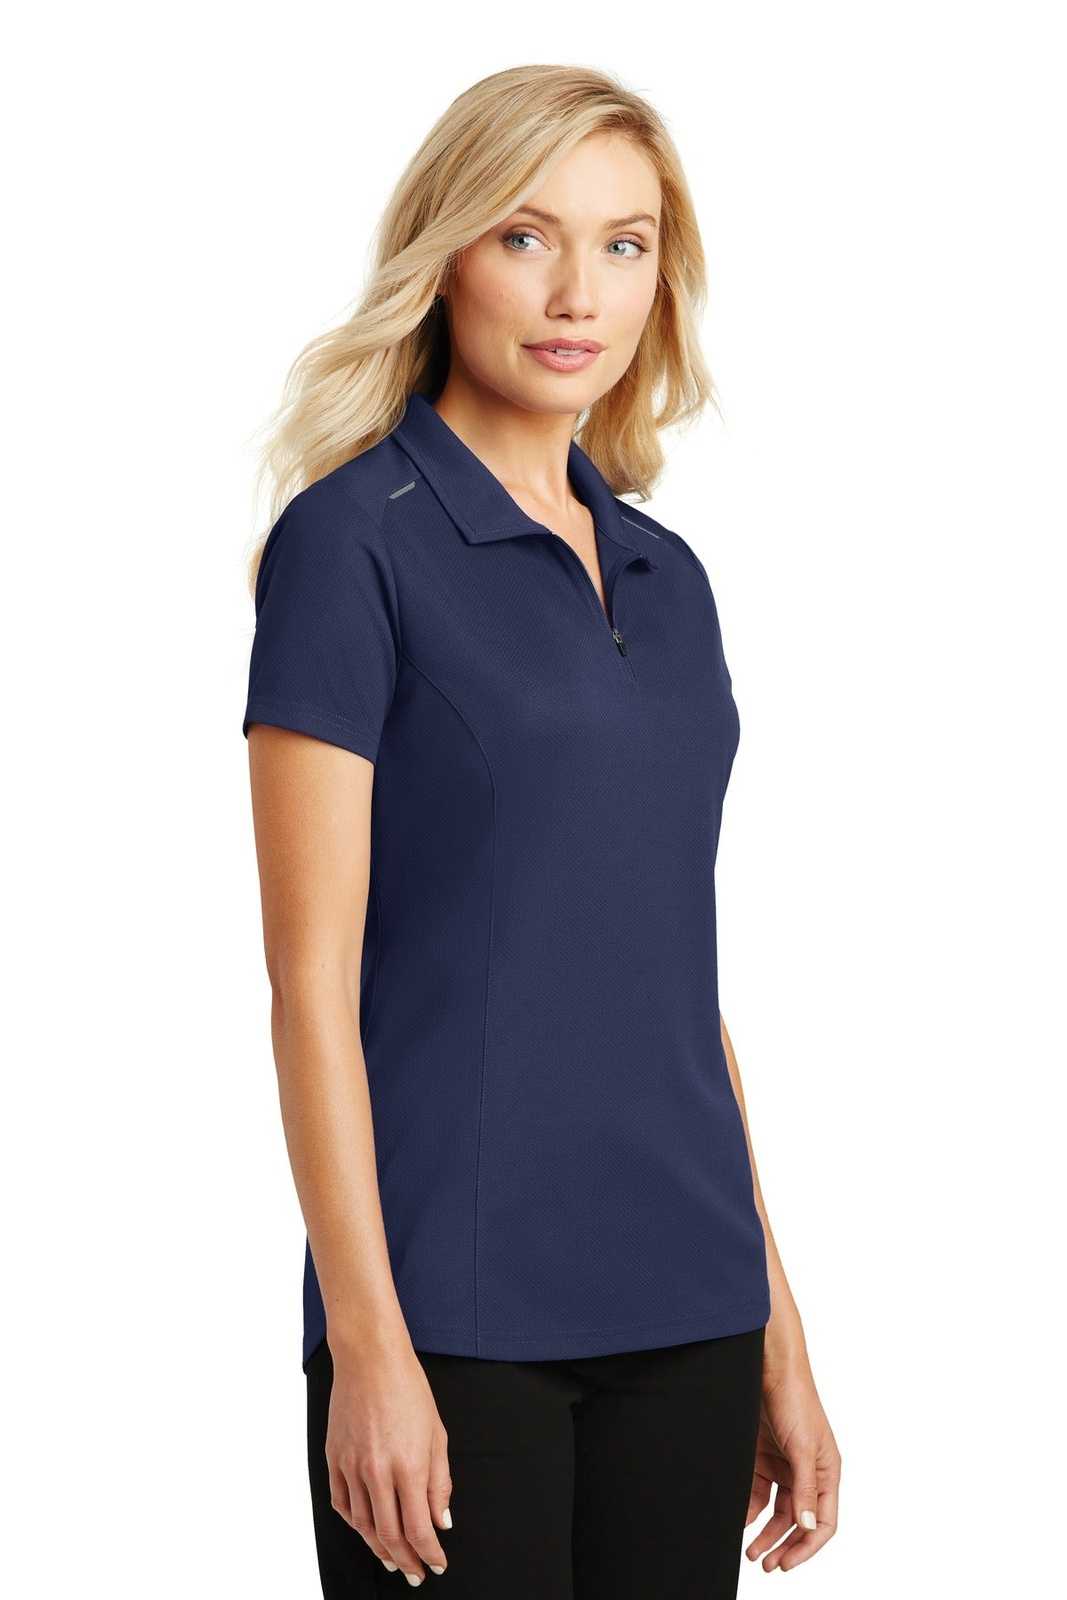 Port Authority L580 Ladies Pinpoint Mesh Zip Polo - True Navy - HIT a Double - 4